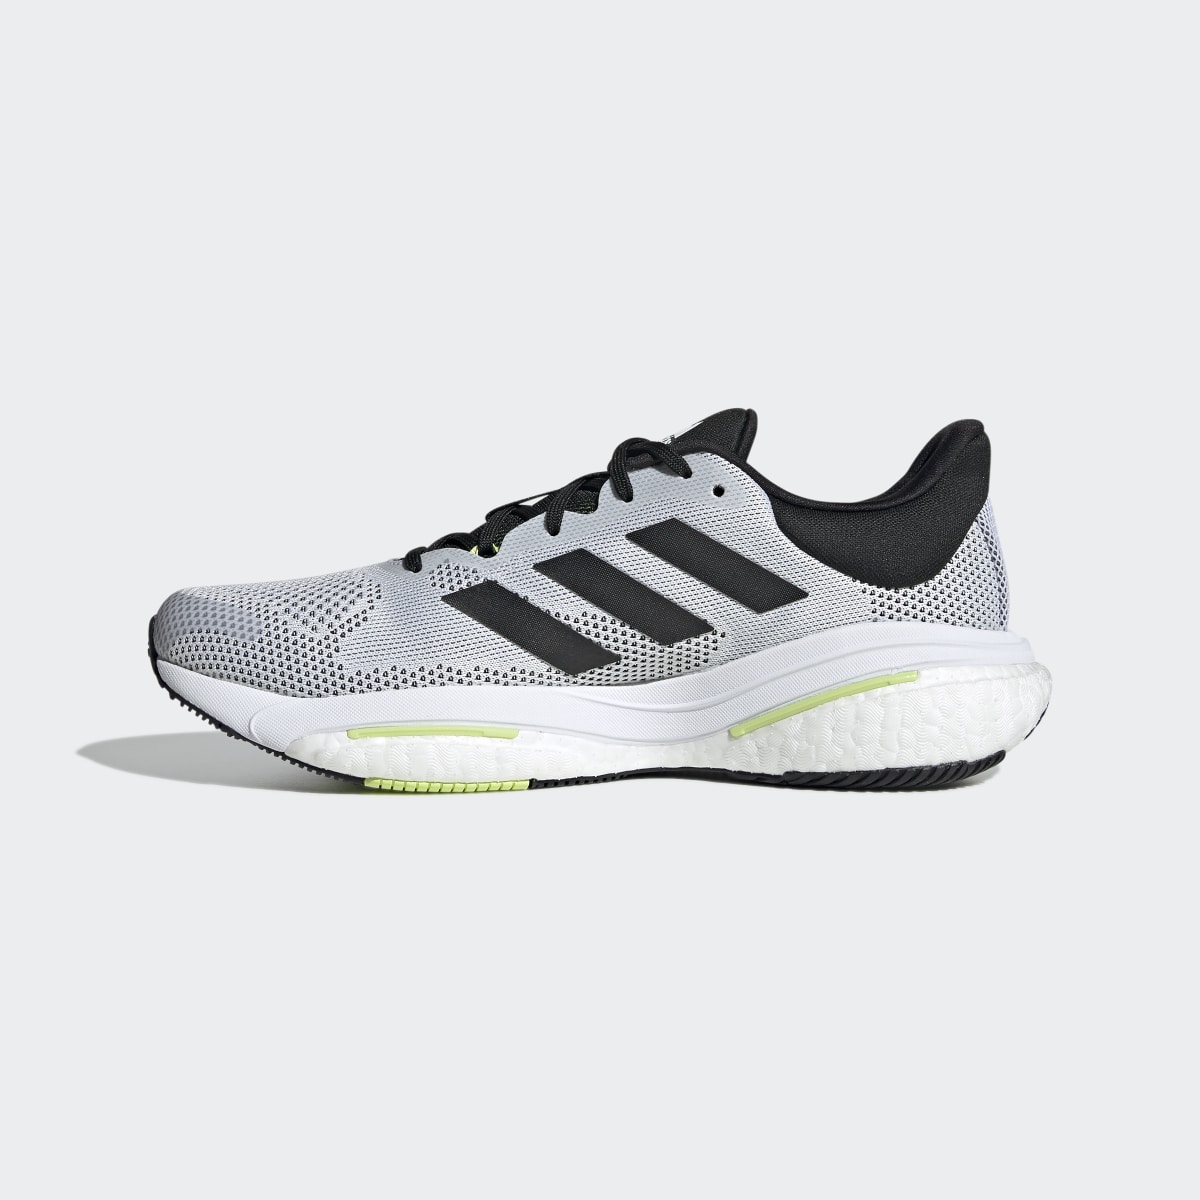 Adidas Solarglide 5 Shoes. 7